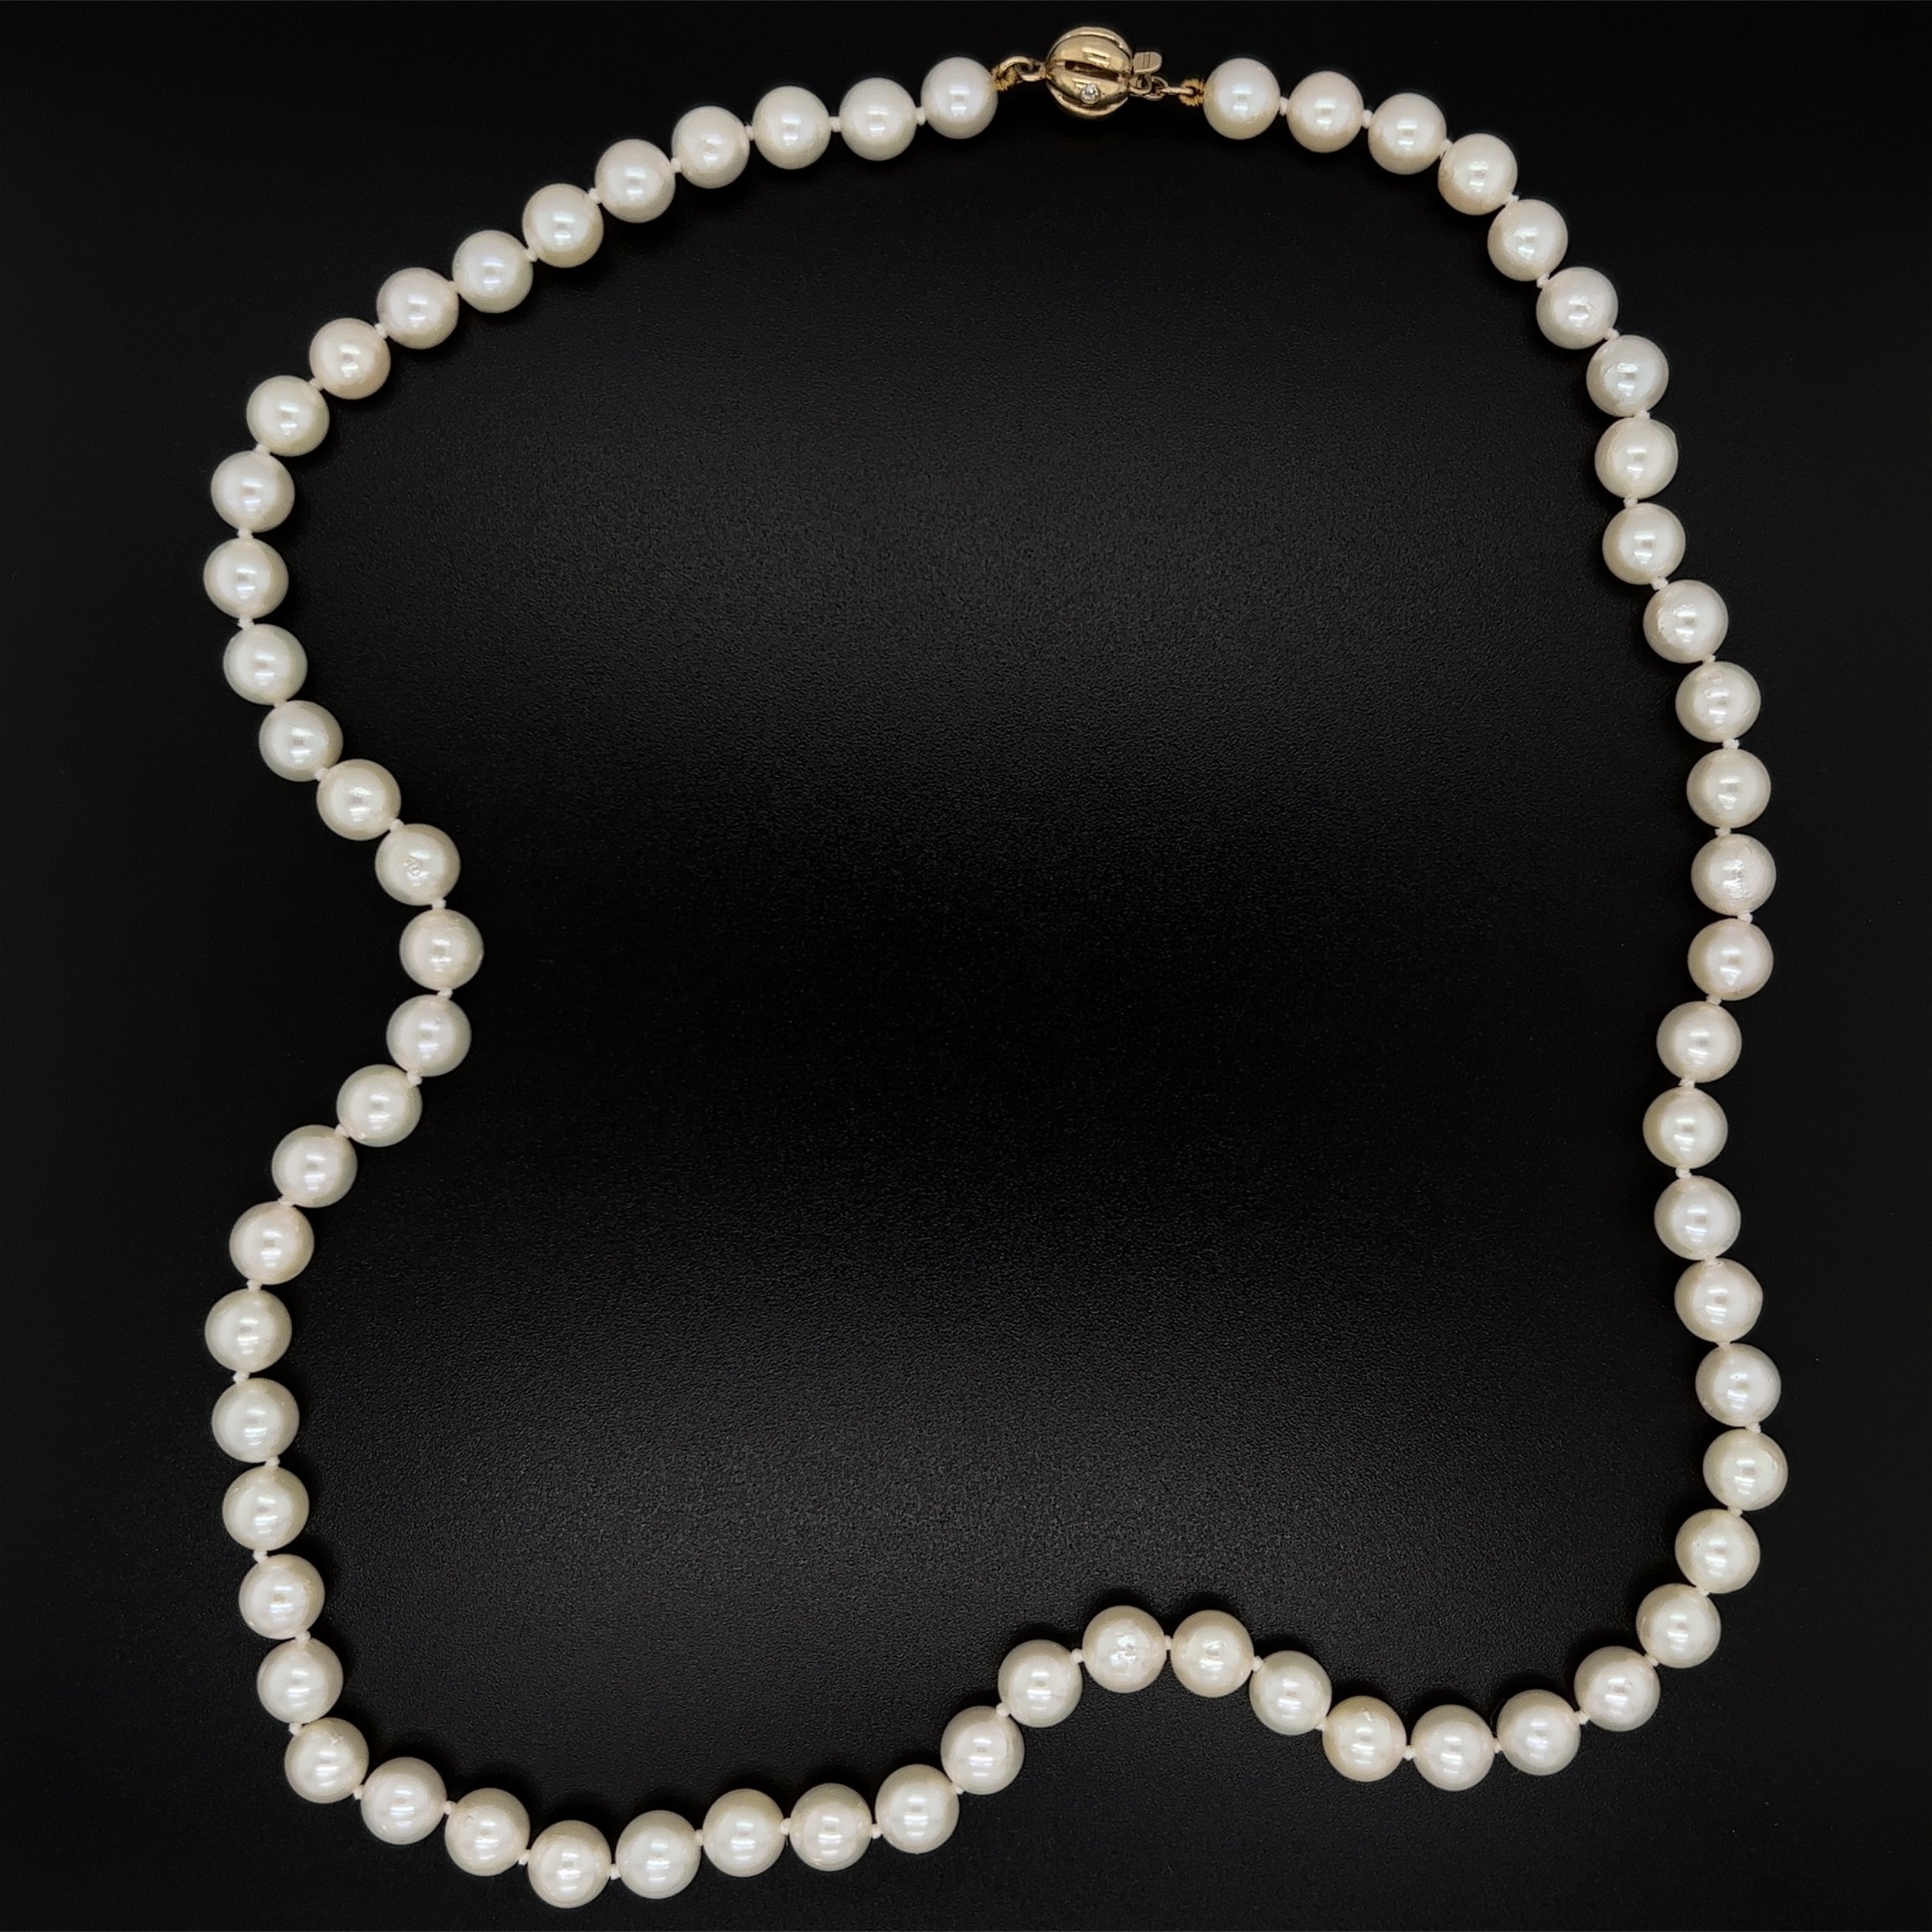 14K YG 6-6.5mm Fresh Water Pearl Necklace with .03tc Diamond Clasp 24.5g, 18"